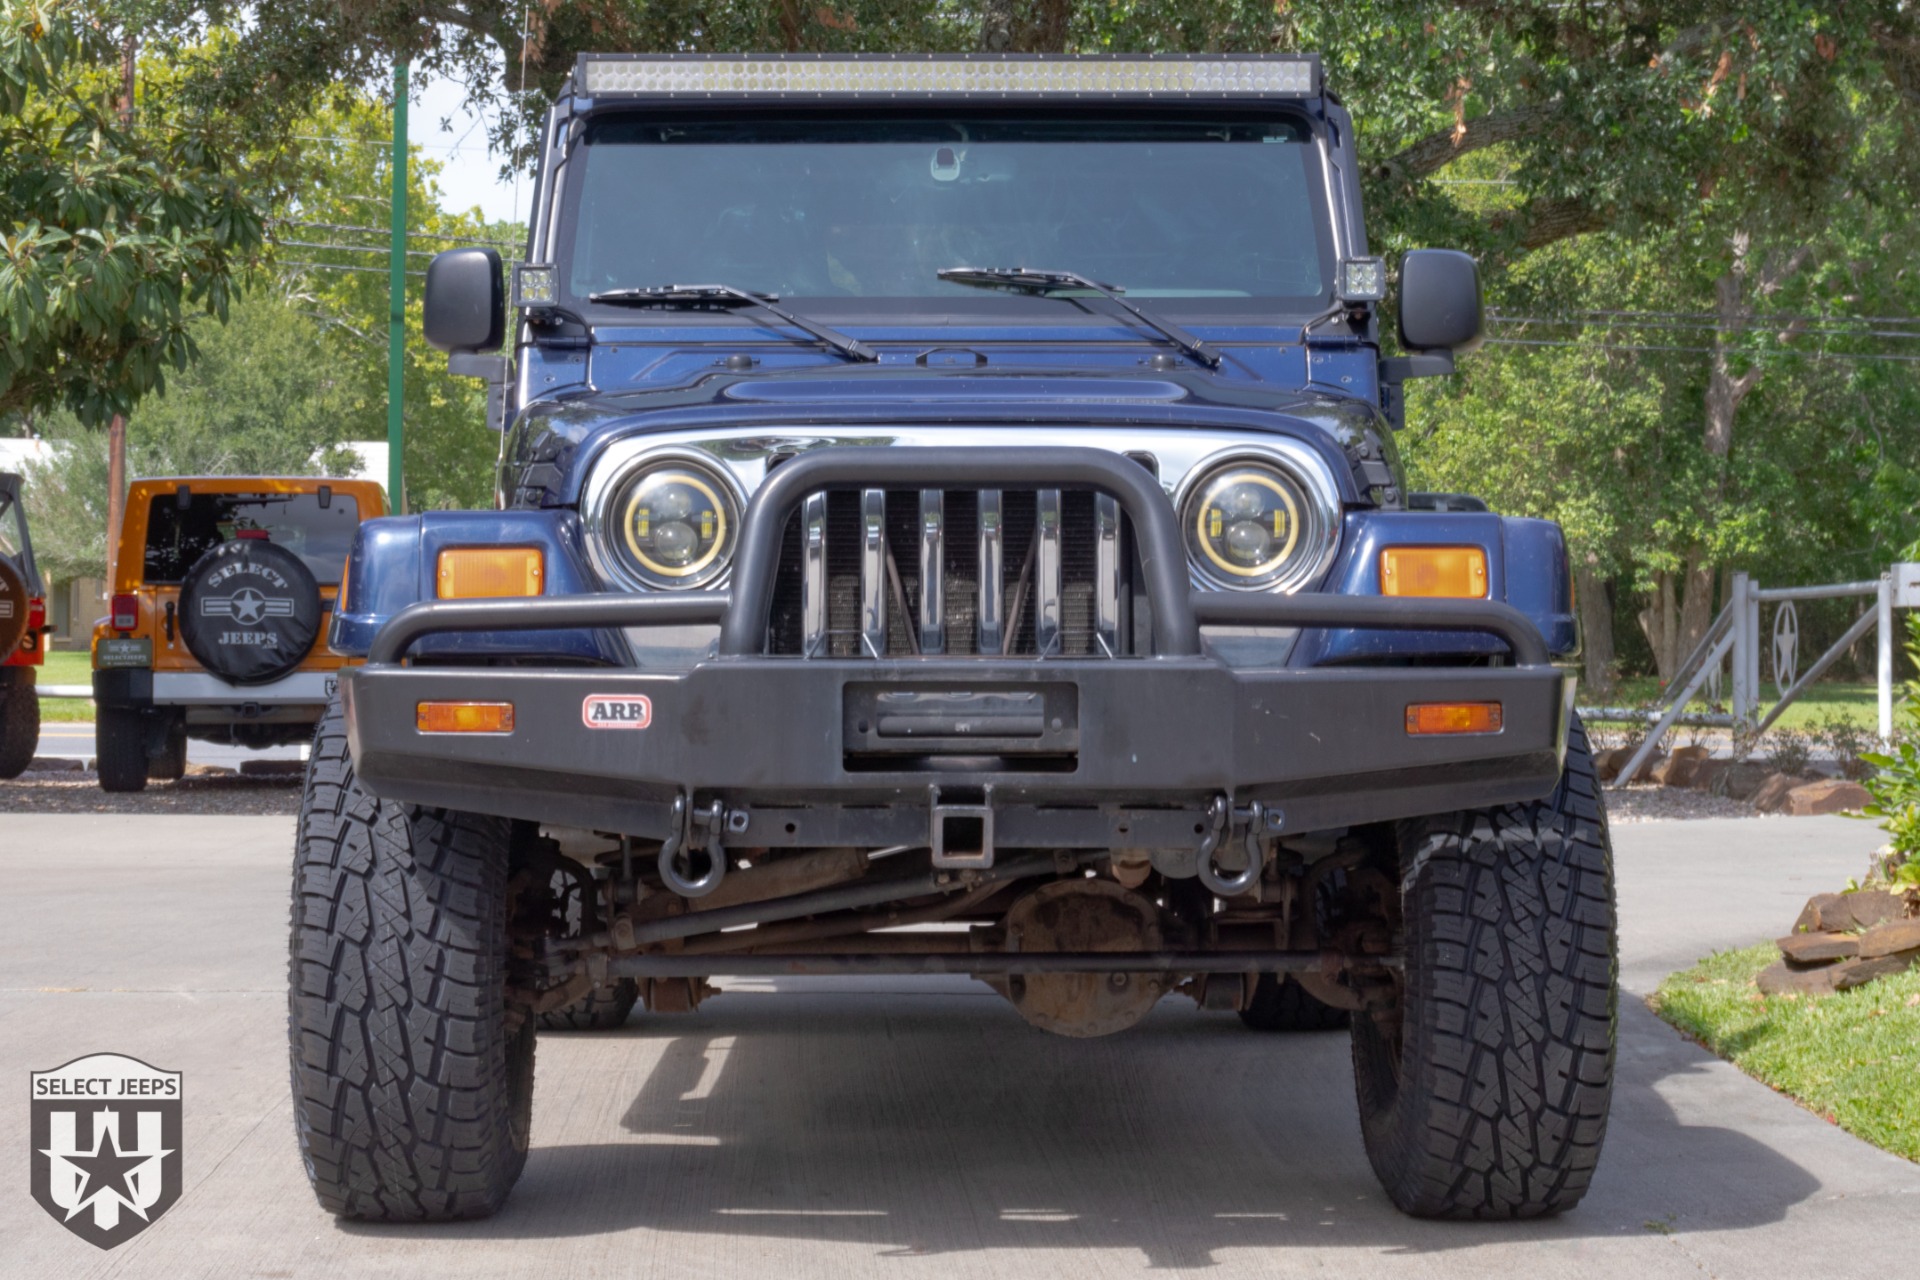 Used 2006 Jeep Wrangler Unlimited For Sale ($22,995) | Select Jeeps Inc.  Stock #759875